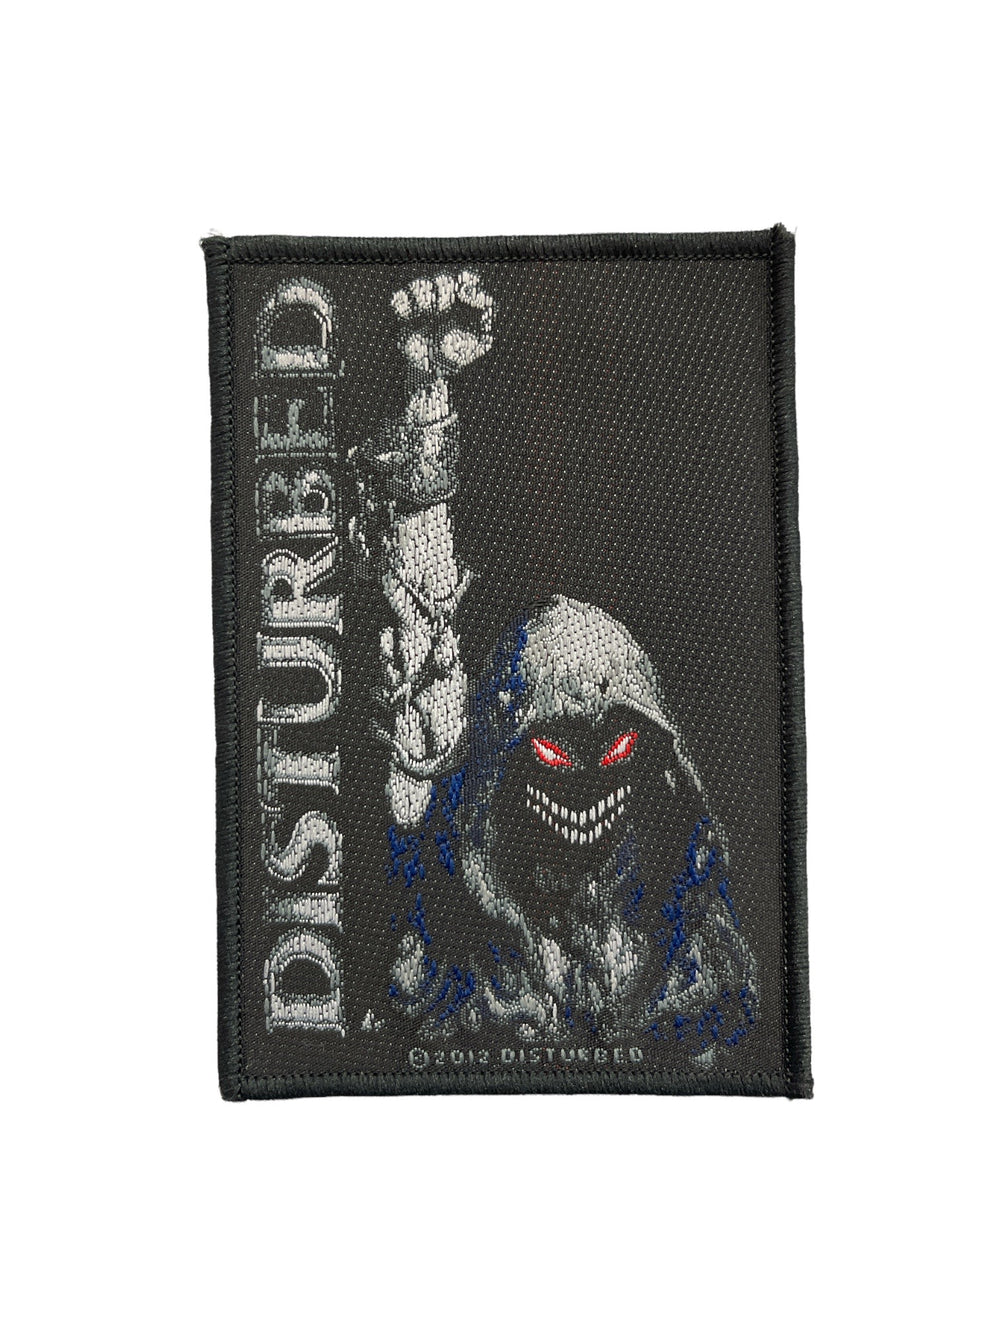 Disturbed Fist Official Woven Patch Brand New